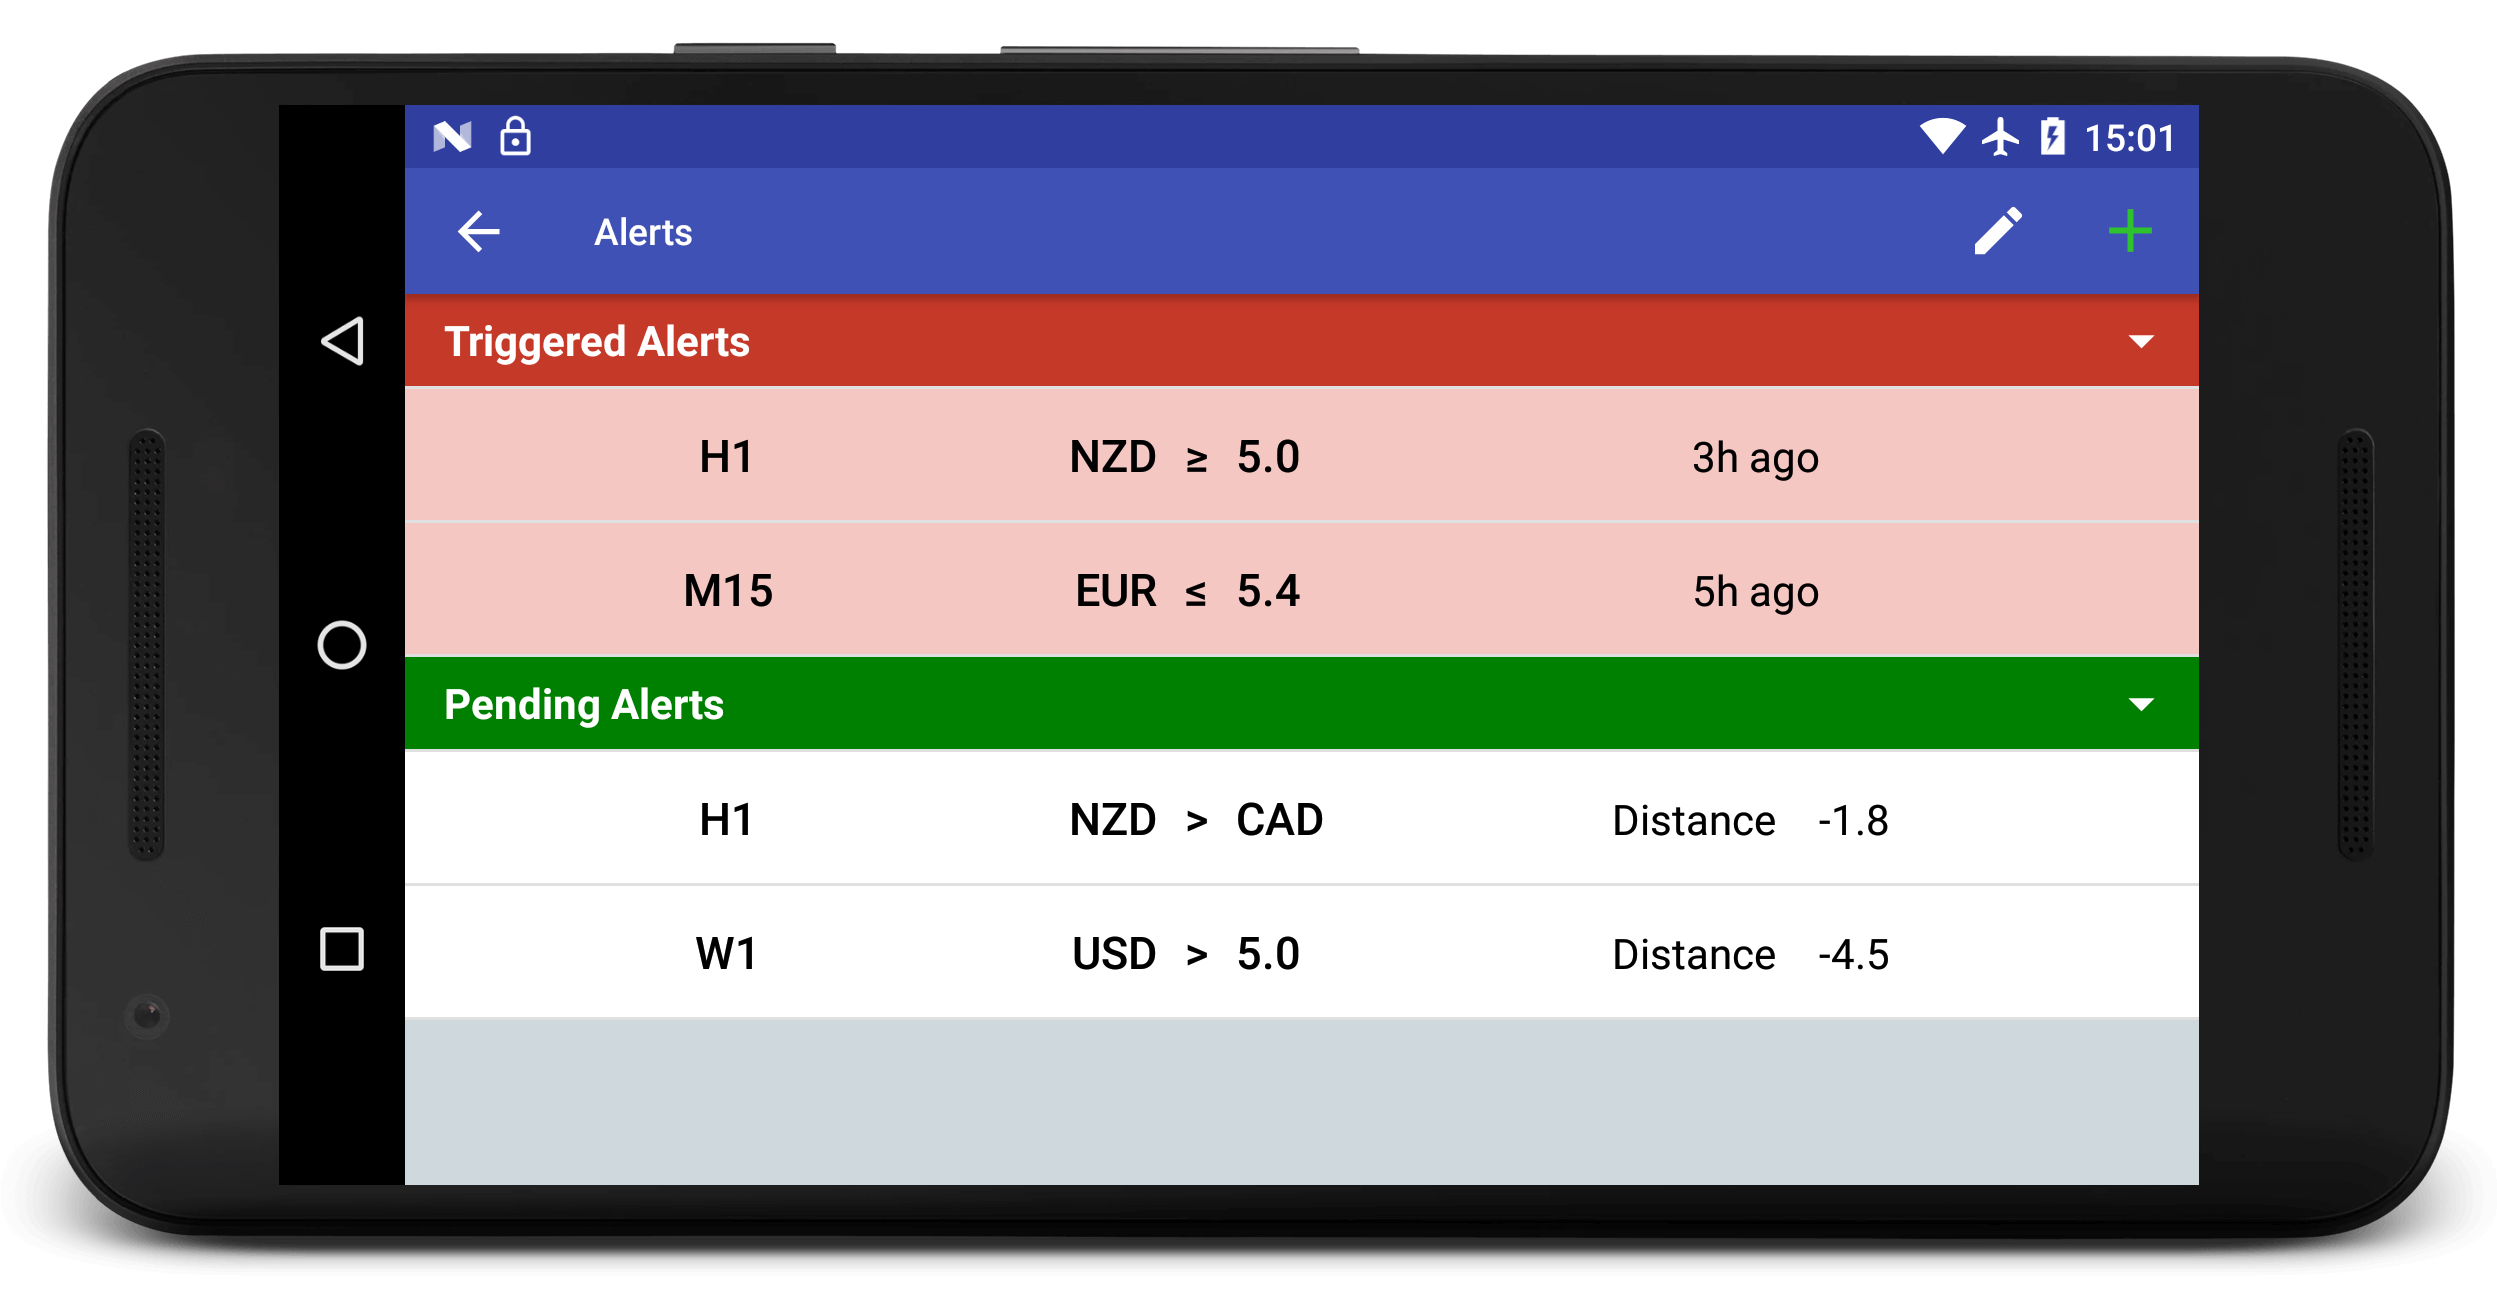 Most accurate currency strength meter